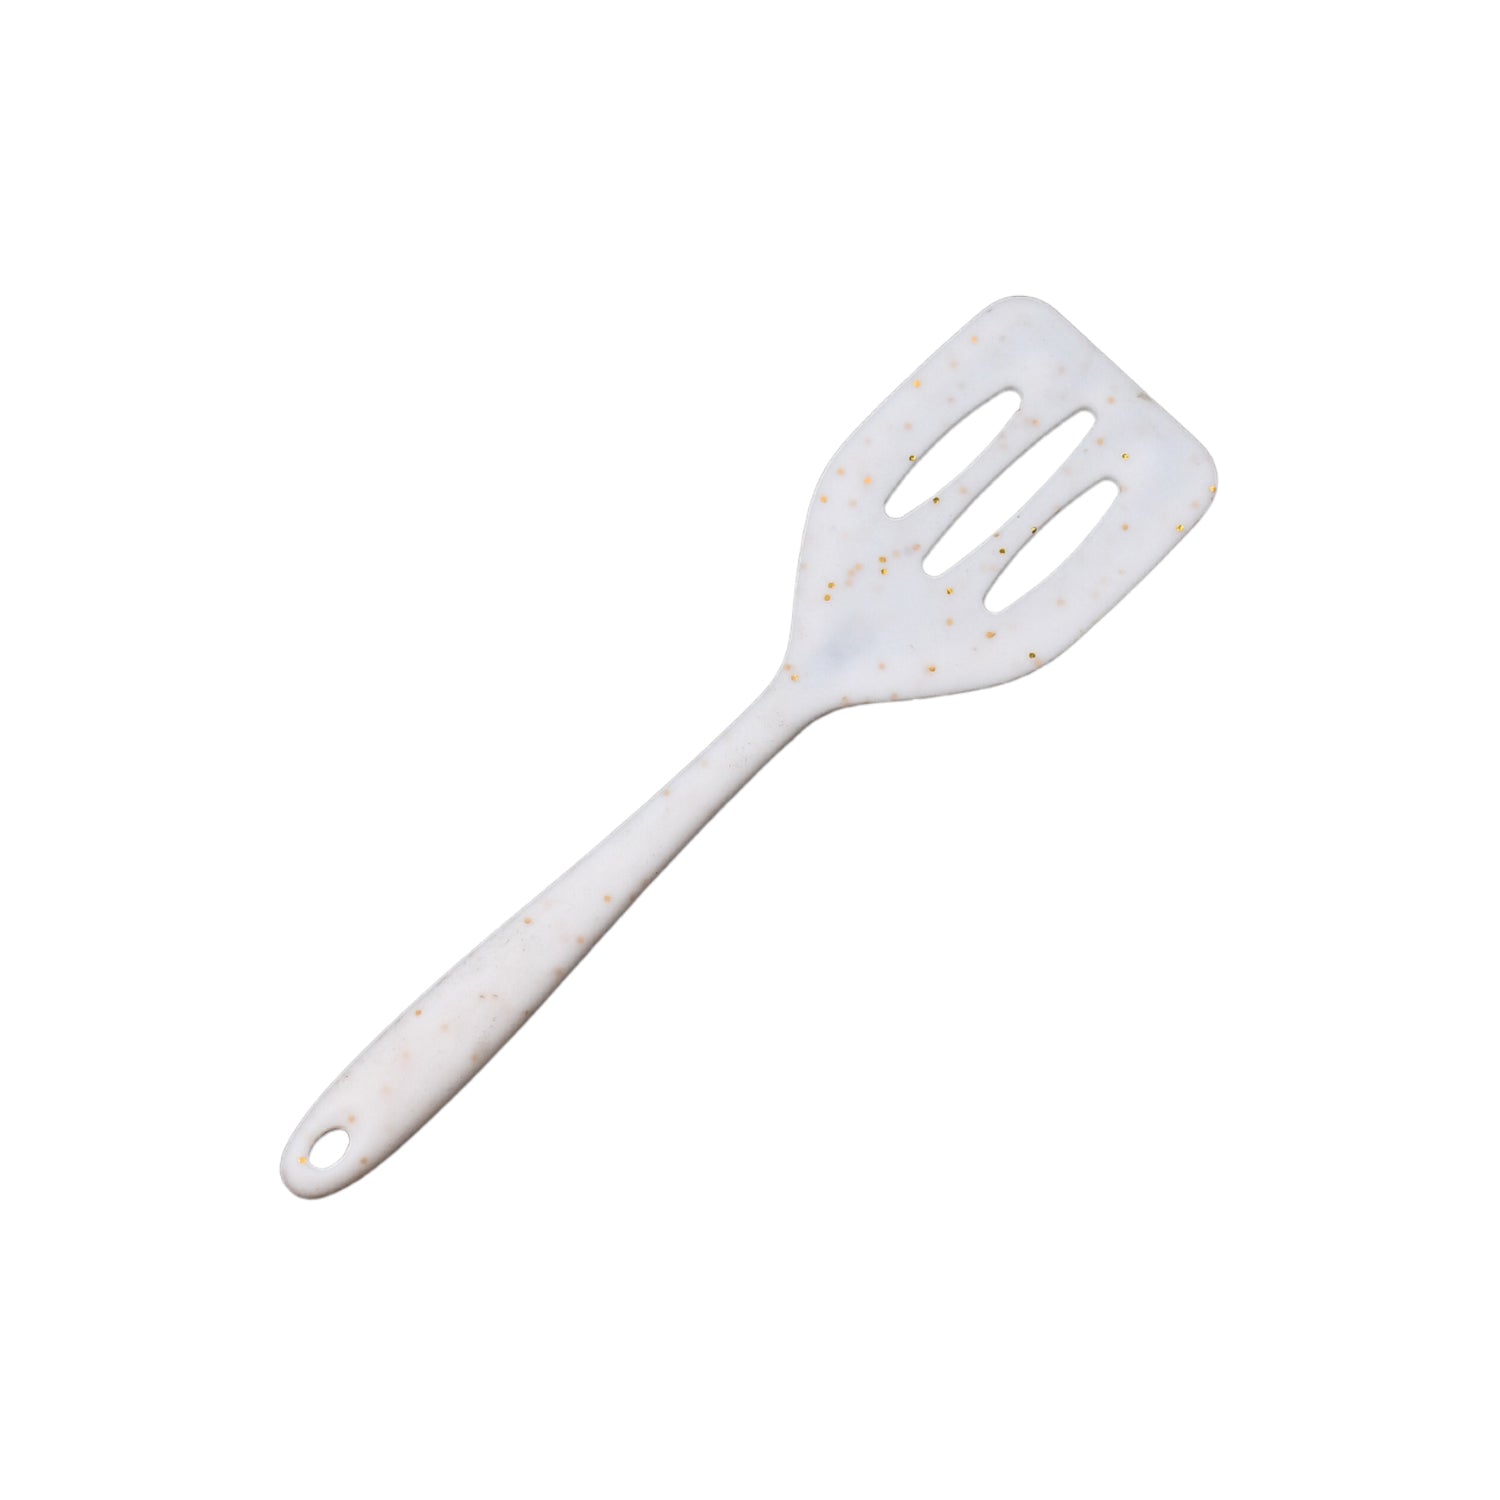 5422 Silicone Turner Spatula/Slotted Spatula High Heat Resistant to 480°F, Hygienic One Piece Design, Non Stick Kitchen Utensil for Fish, Eggs, Pancakes (21cm) JK Trends